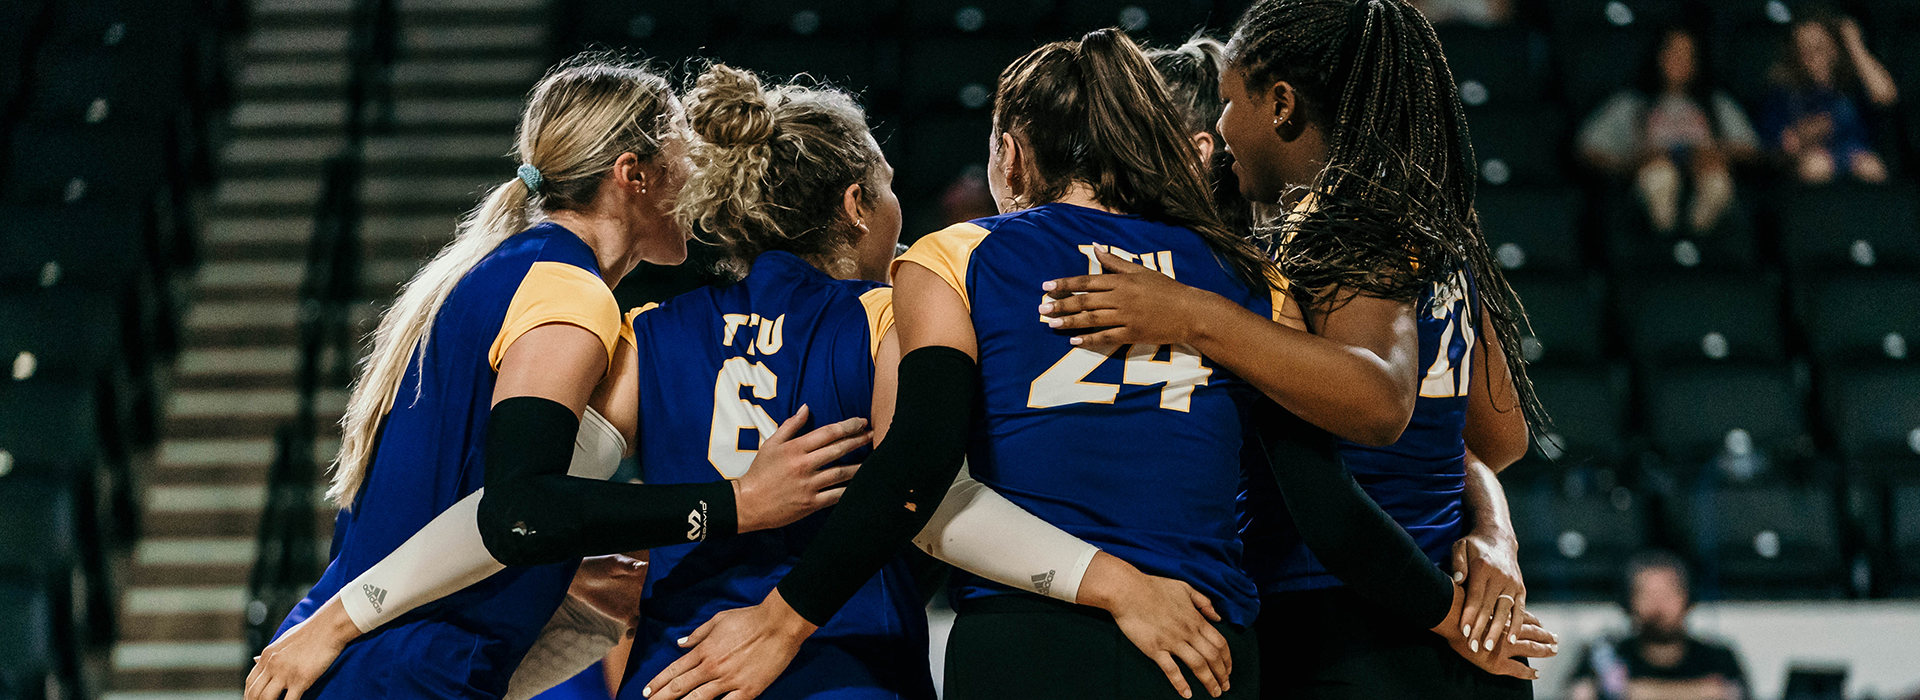 Tech to host first home matches at 2022 Golden Eagle Invitational